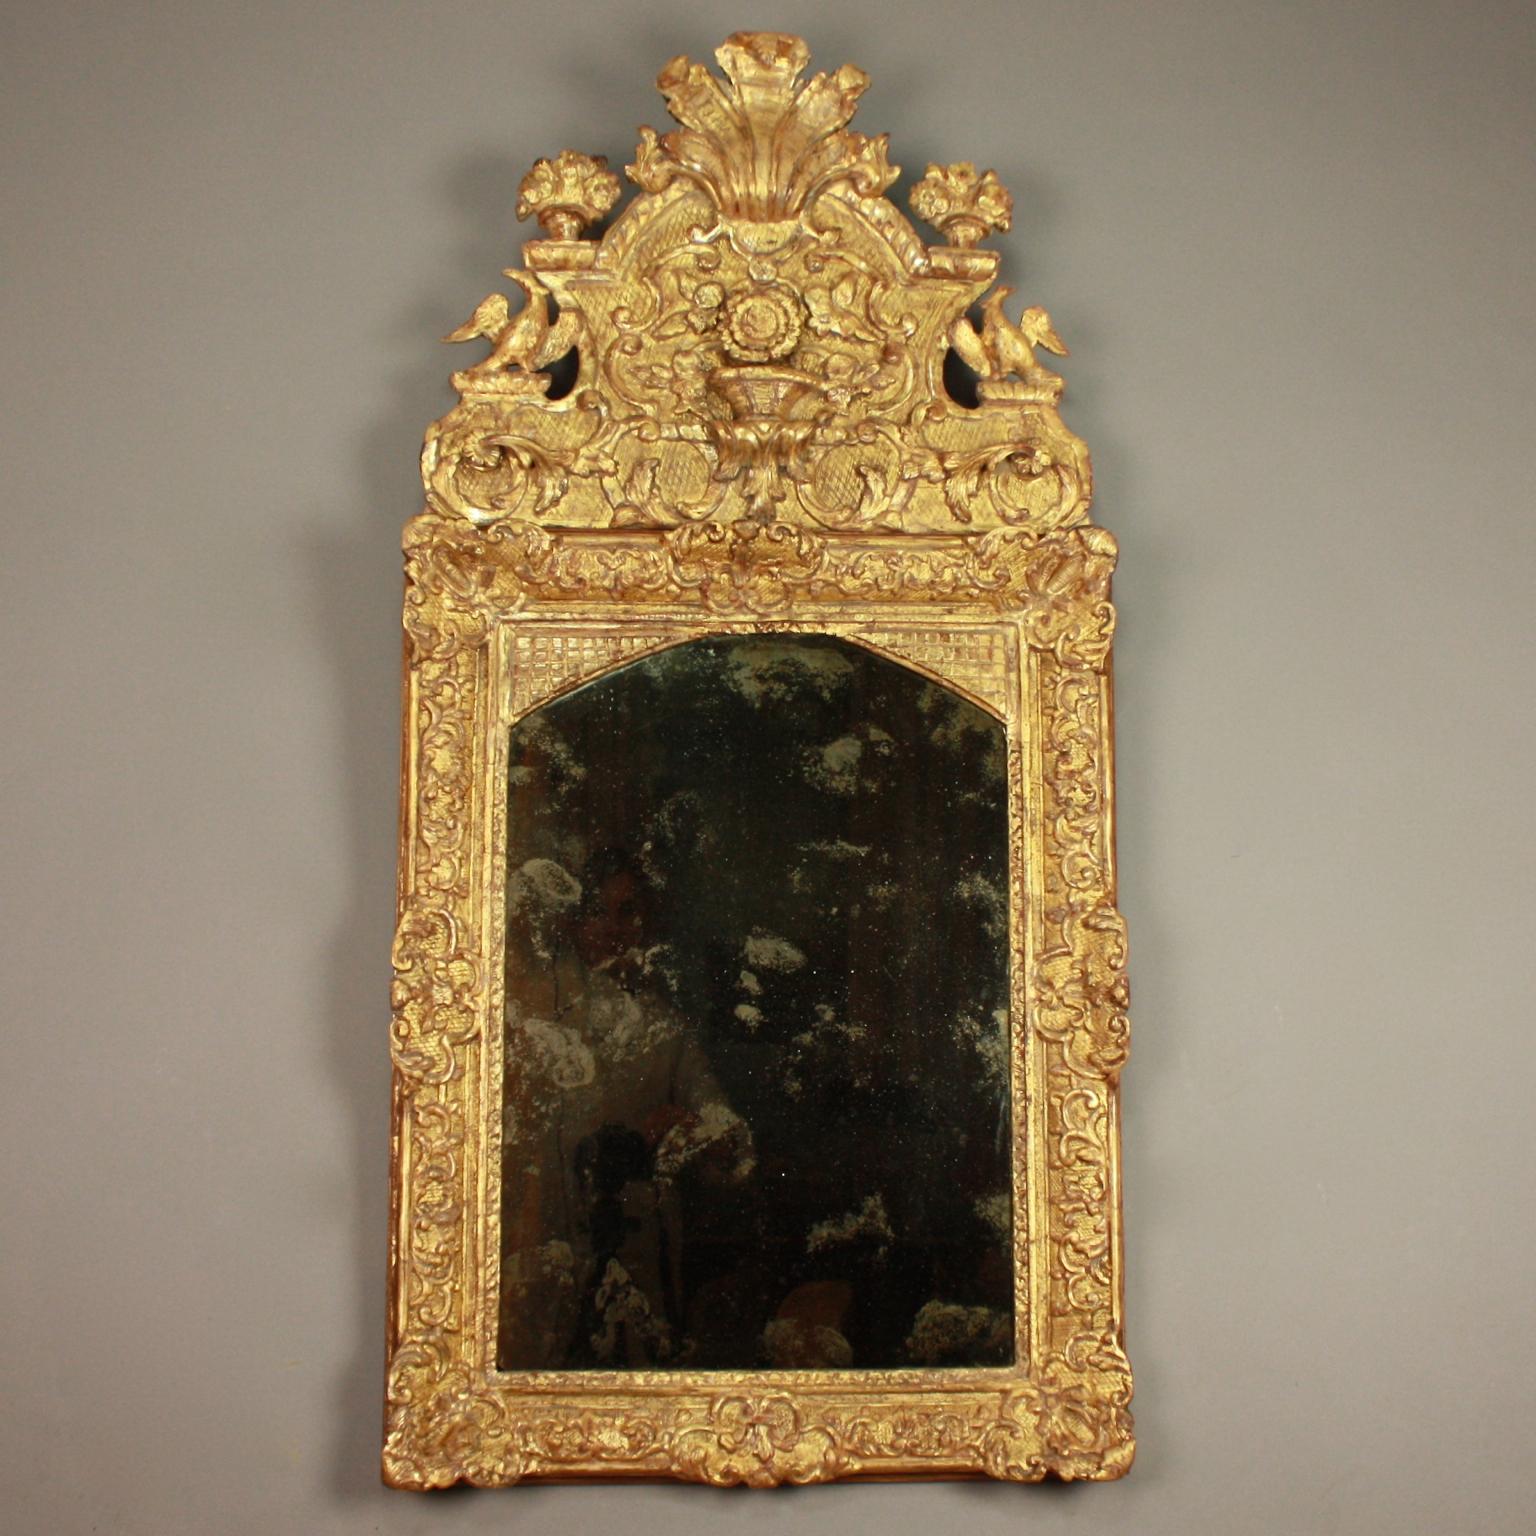 French Early 18th Century Régence Vase and Birds Cresting Giltwood Mirror

An early 18th century Régence giltwood mirror with a rectangular plate within an arched frame adorned with carved interlaced scrolls, acanthus, cabochons and foliate on a